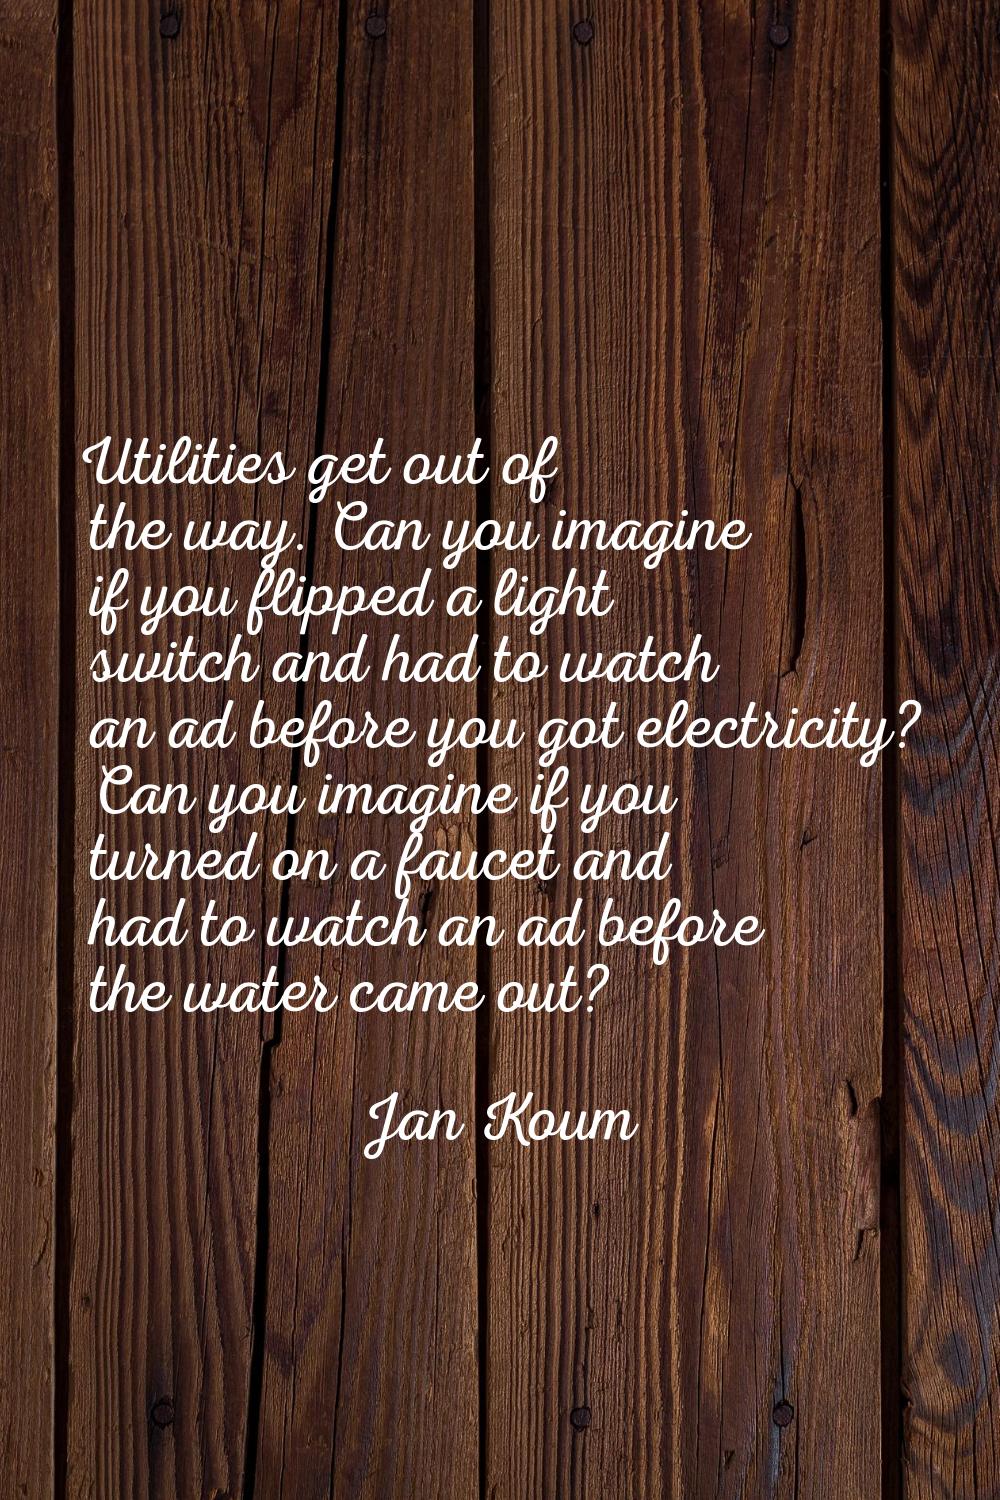 Utilities get out of the way. Can you imagine if you flipped a light switch and had to watch an ad 